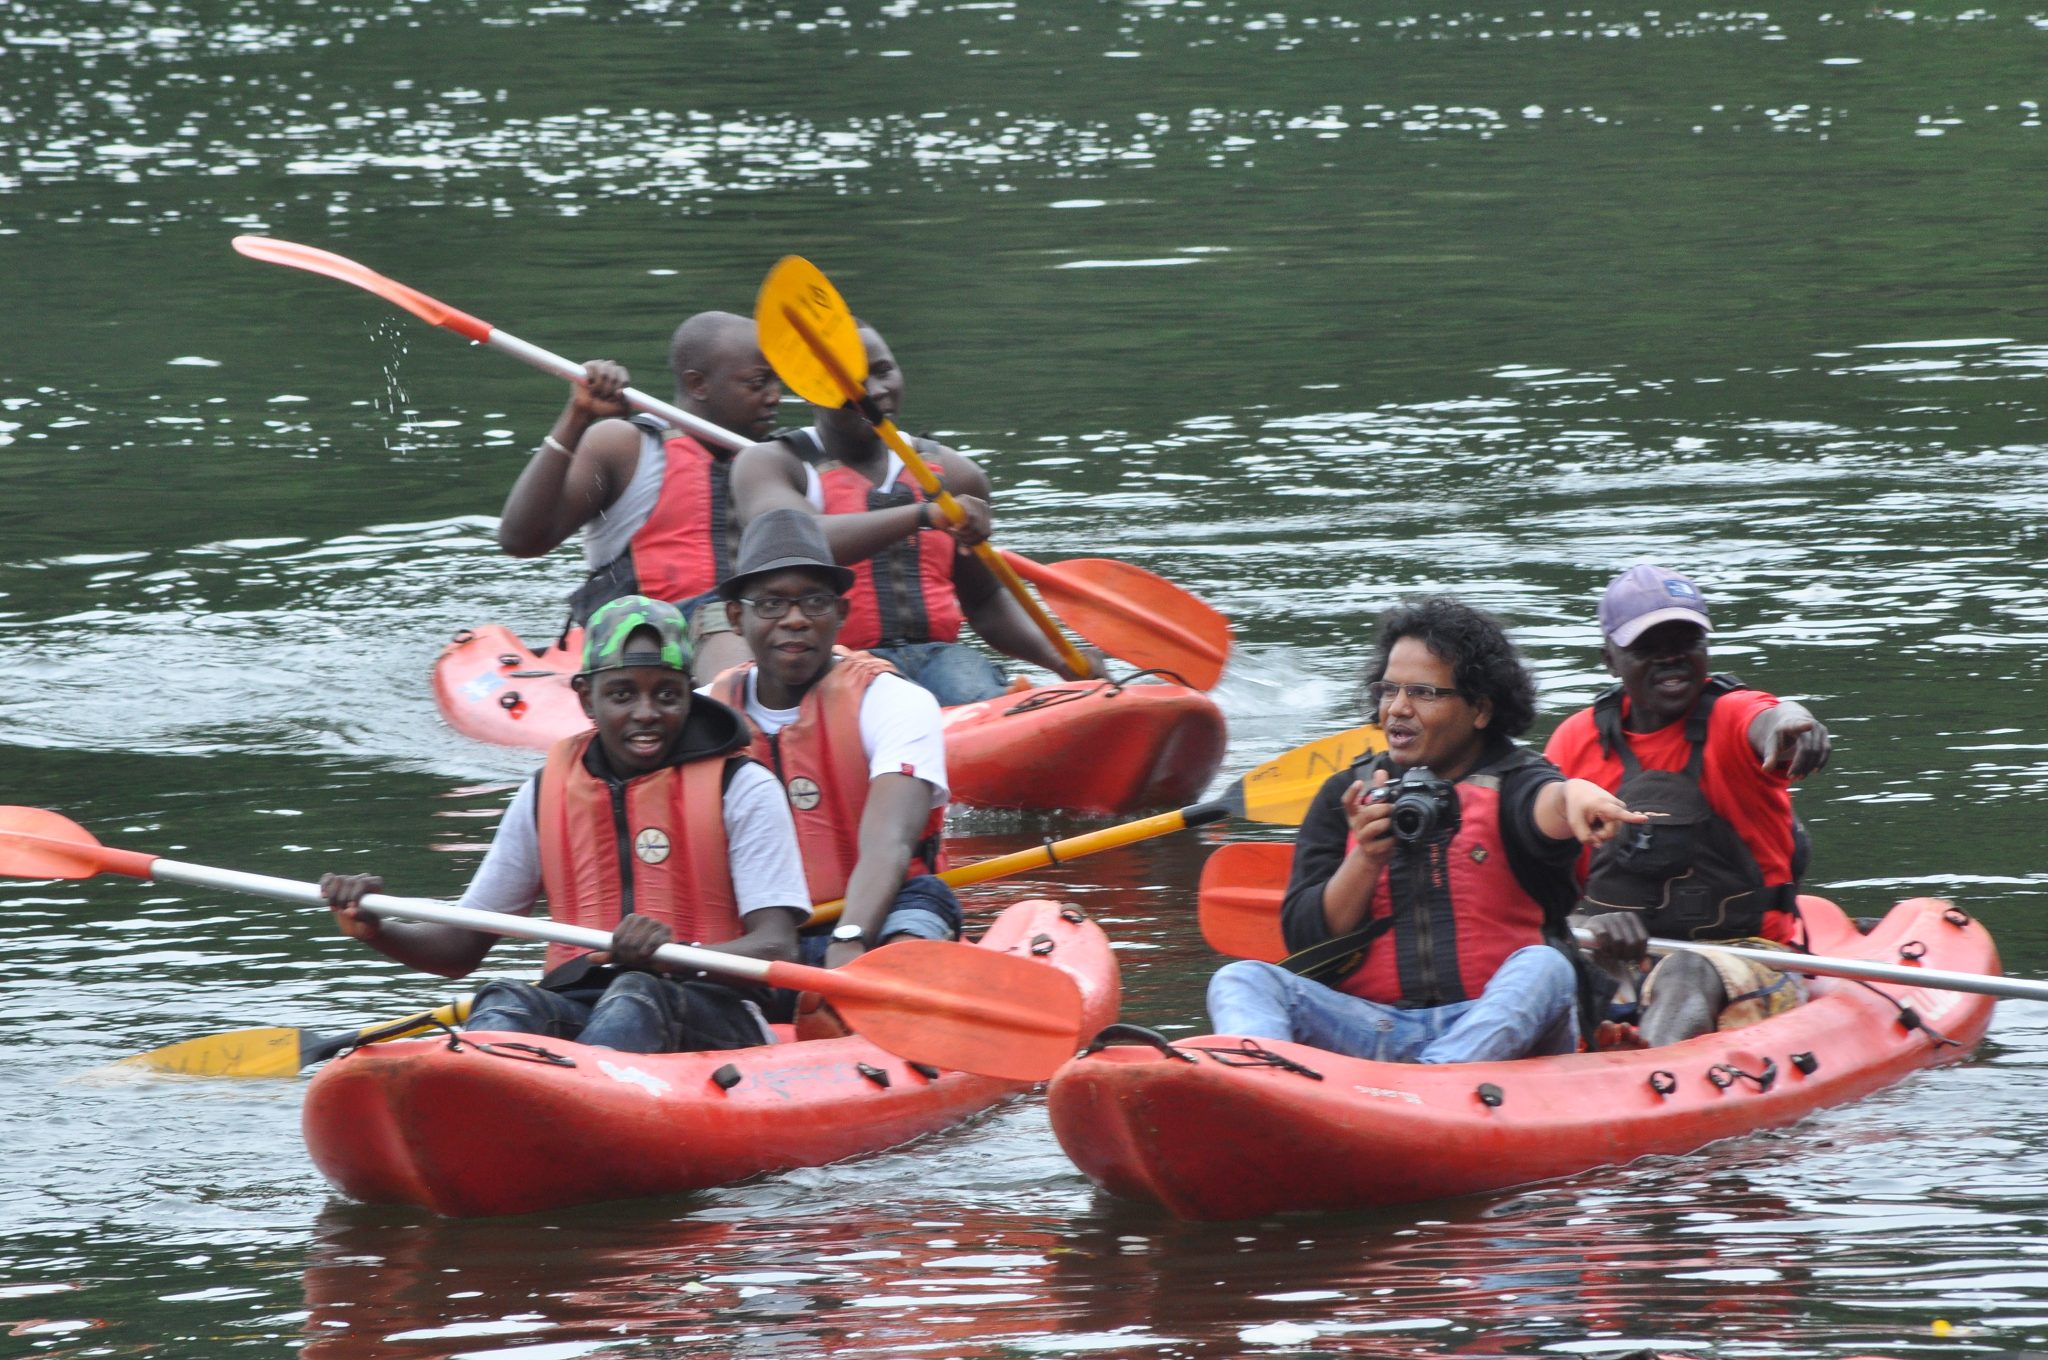 Guests take in Kayaking at the launch of Cocacola Taste the Feeling camp...